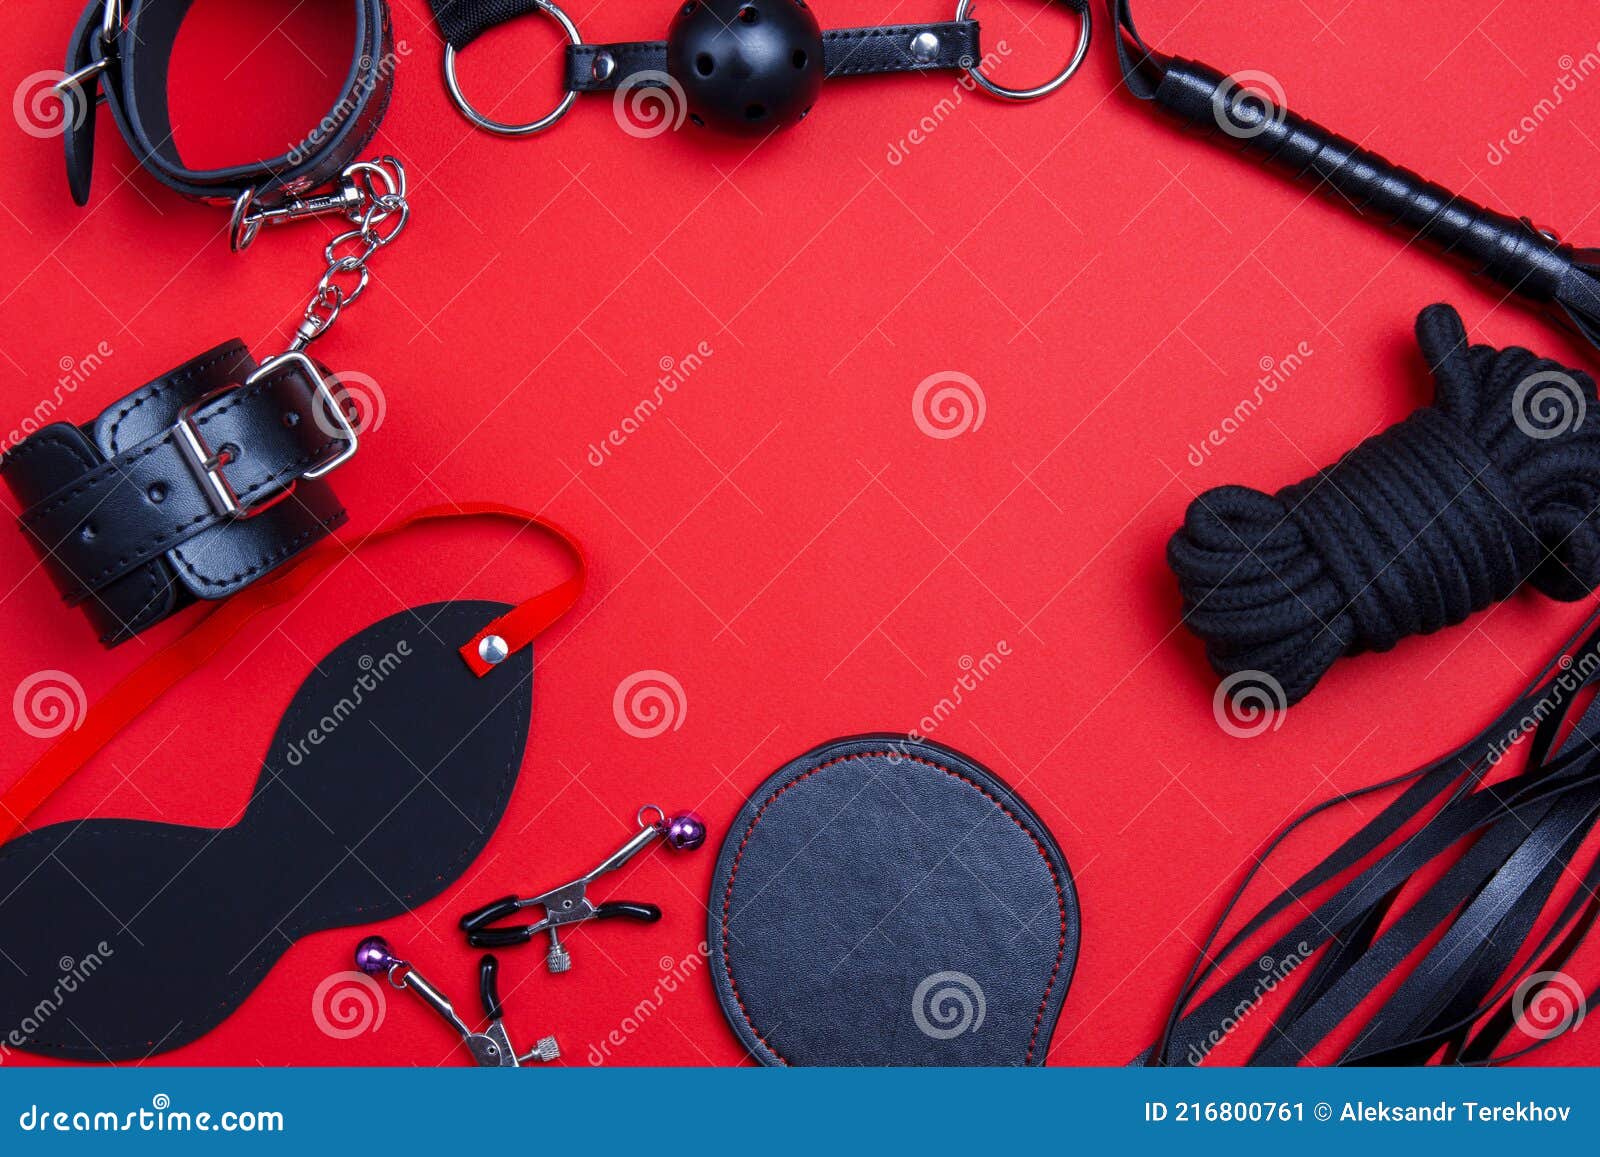 BDSM Toys for Sex and Punishment in Form a Frame Stock Image pic